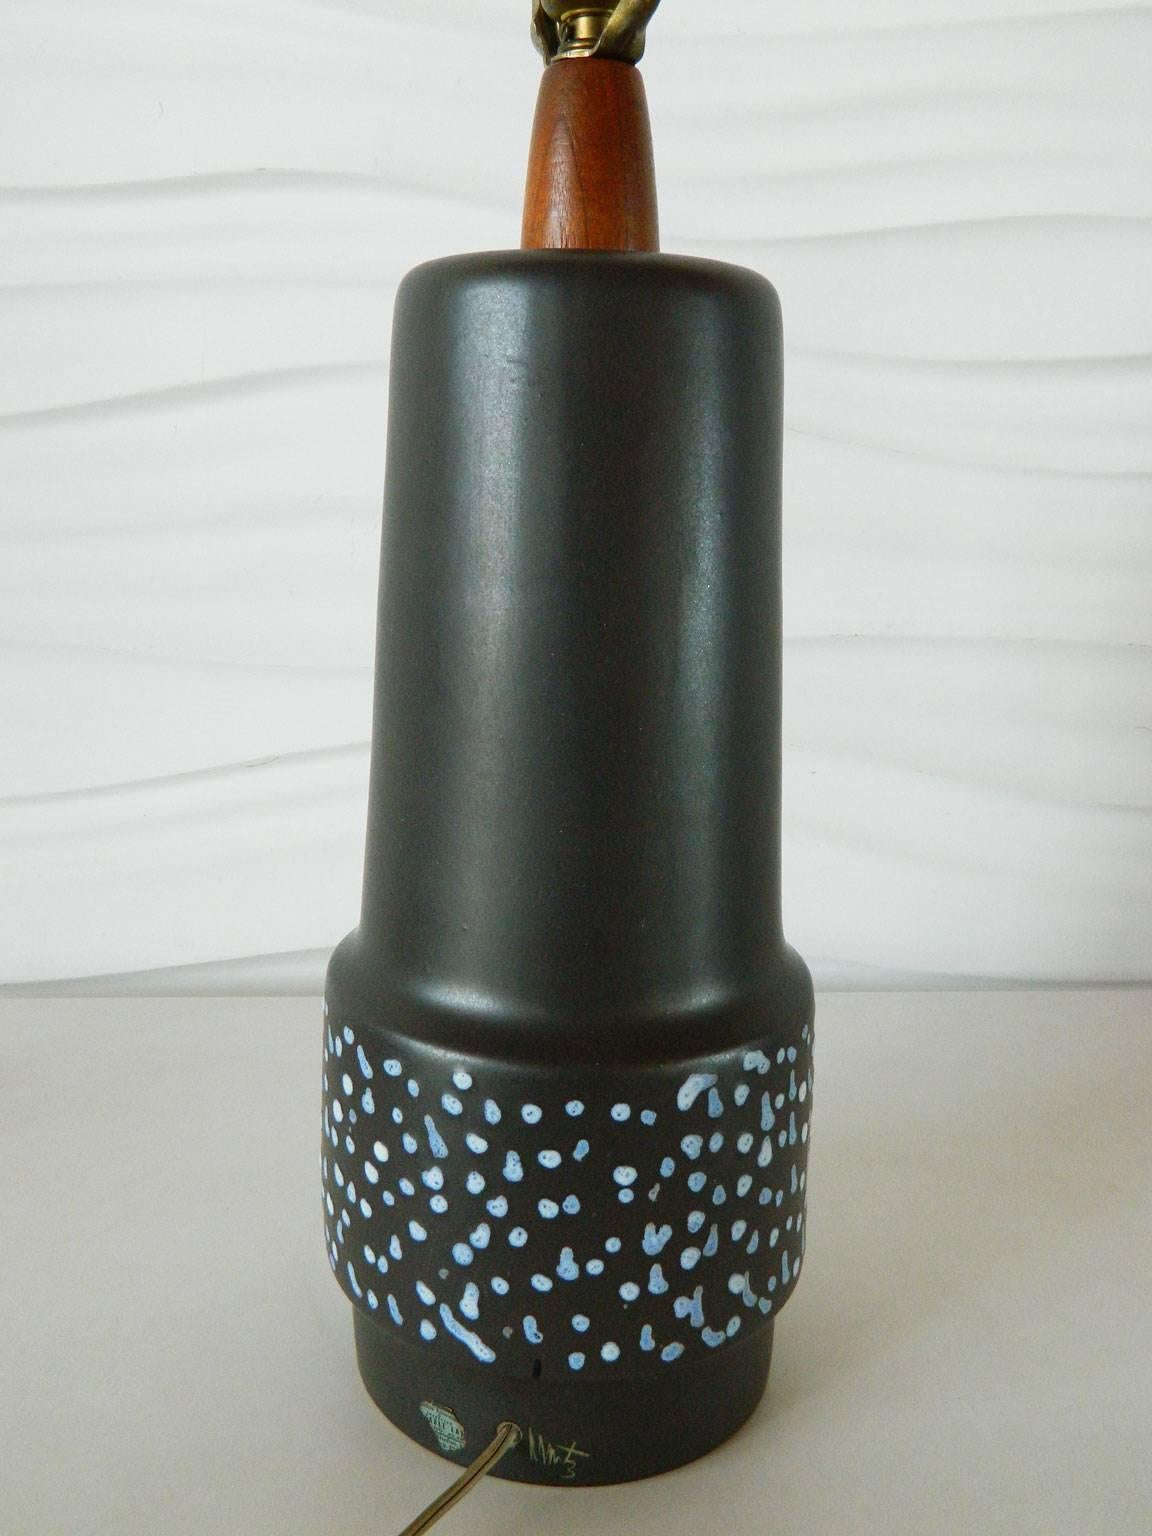 Designed by artists Gordon and Jane Martz in the 1960s, this matte black ceramic lamp features a walnut neck and painted blue and white decoration. Measures 18 inches tall to the top of the wooden neck.